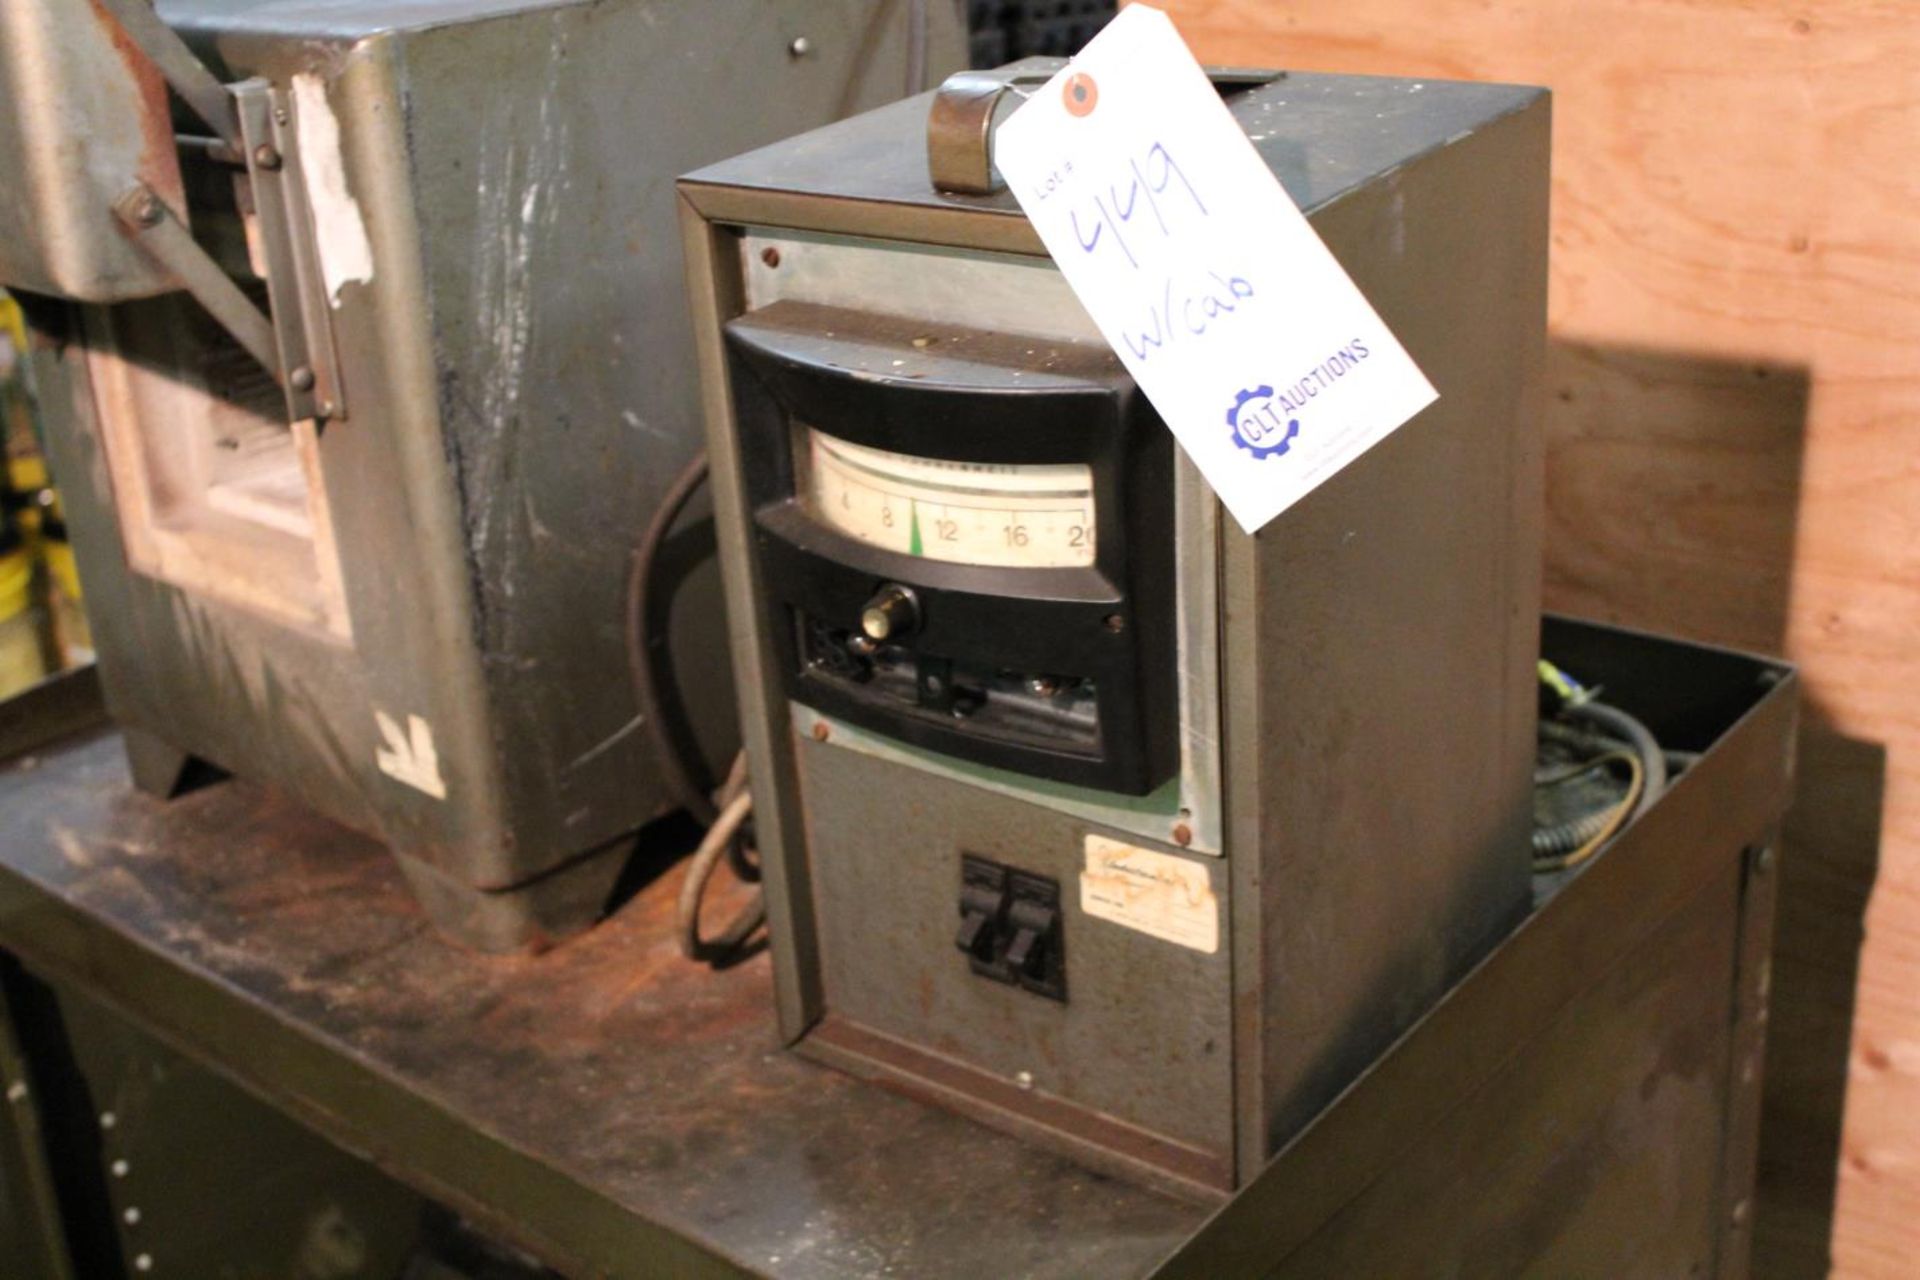 Temco 1620 Heat Treating Furnace With Cabinet, Stanley Grinder - Image 3 of 6